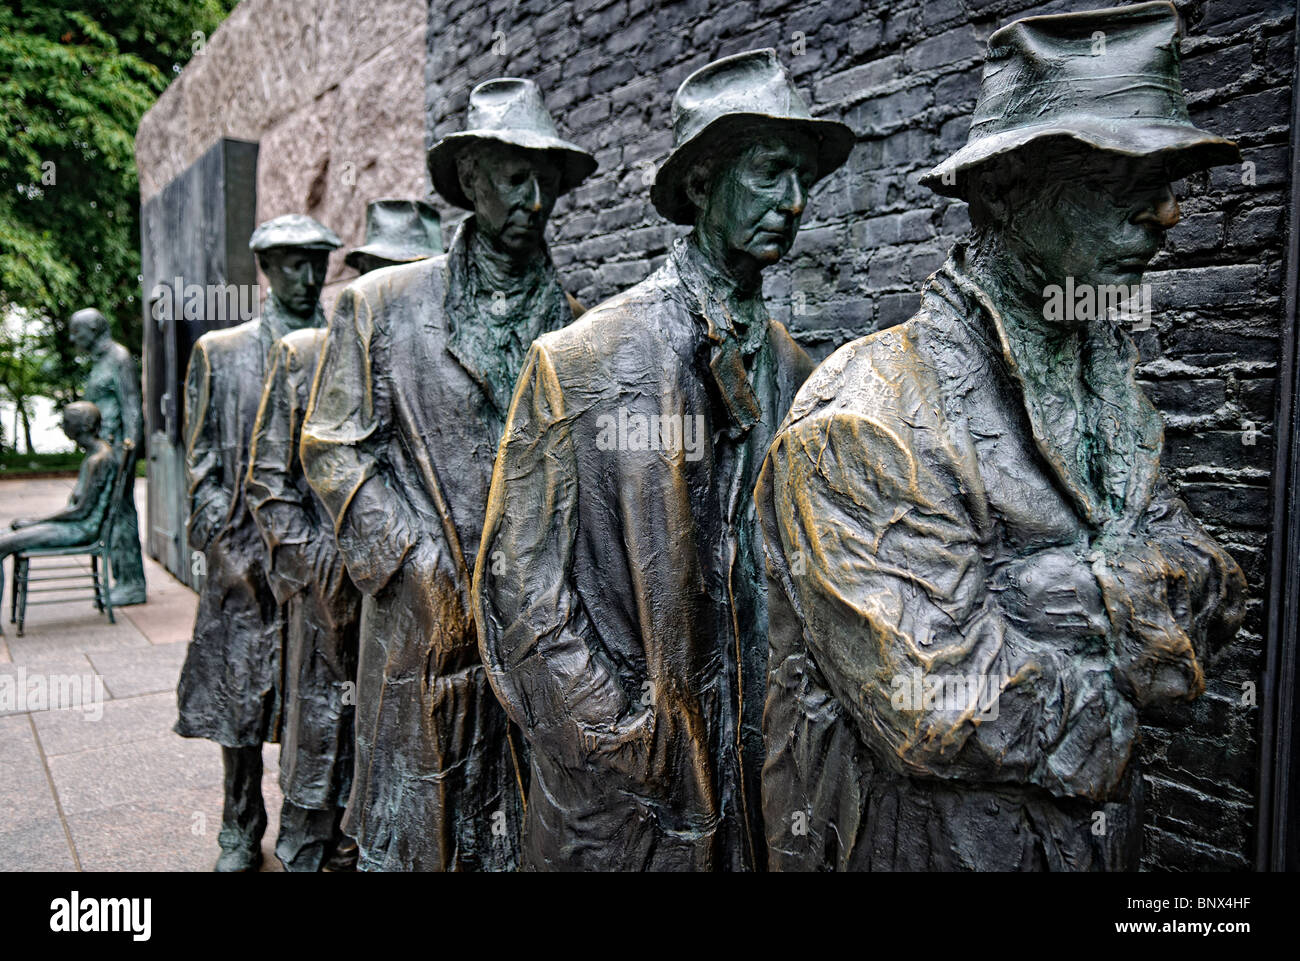 WASHINGTON DC, USA - Sculpture representation of the Great Depression at the Franklin D. Roosevelt Memorial in Washington DC on Haines Point on the banks of the Tidal Basin Stock Photo